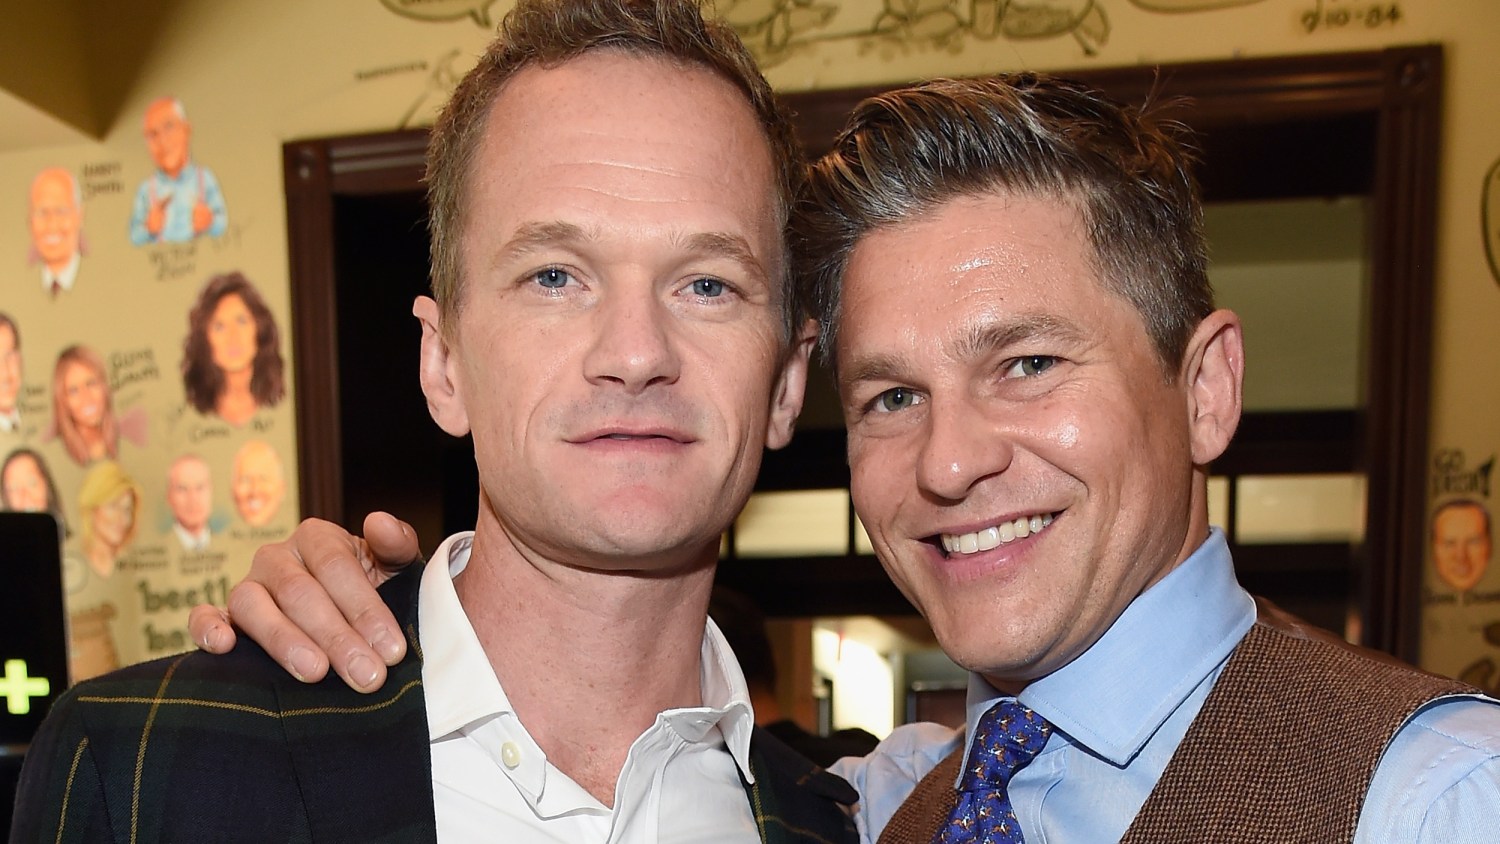 Happy anniversary, Neil Patrick Harris and David Burtka  From their  beautiful family to finishing each other sentences on television, Neil  Patrick Harris and David Burtka have a love story we all